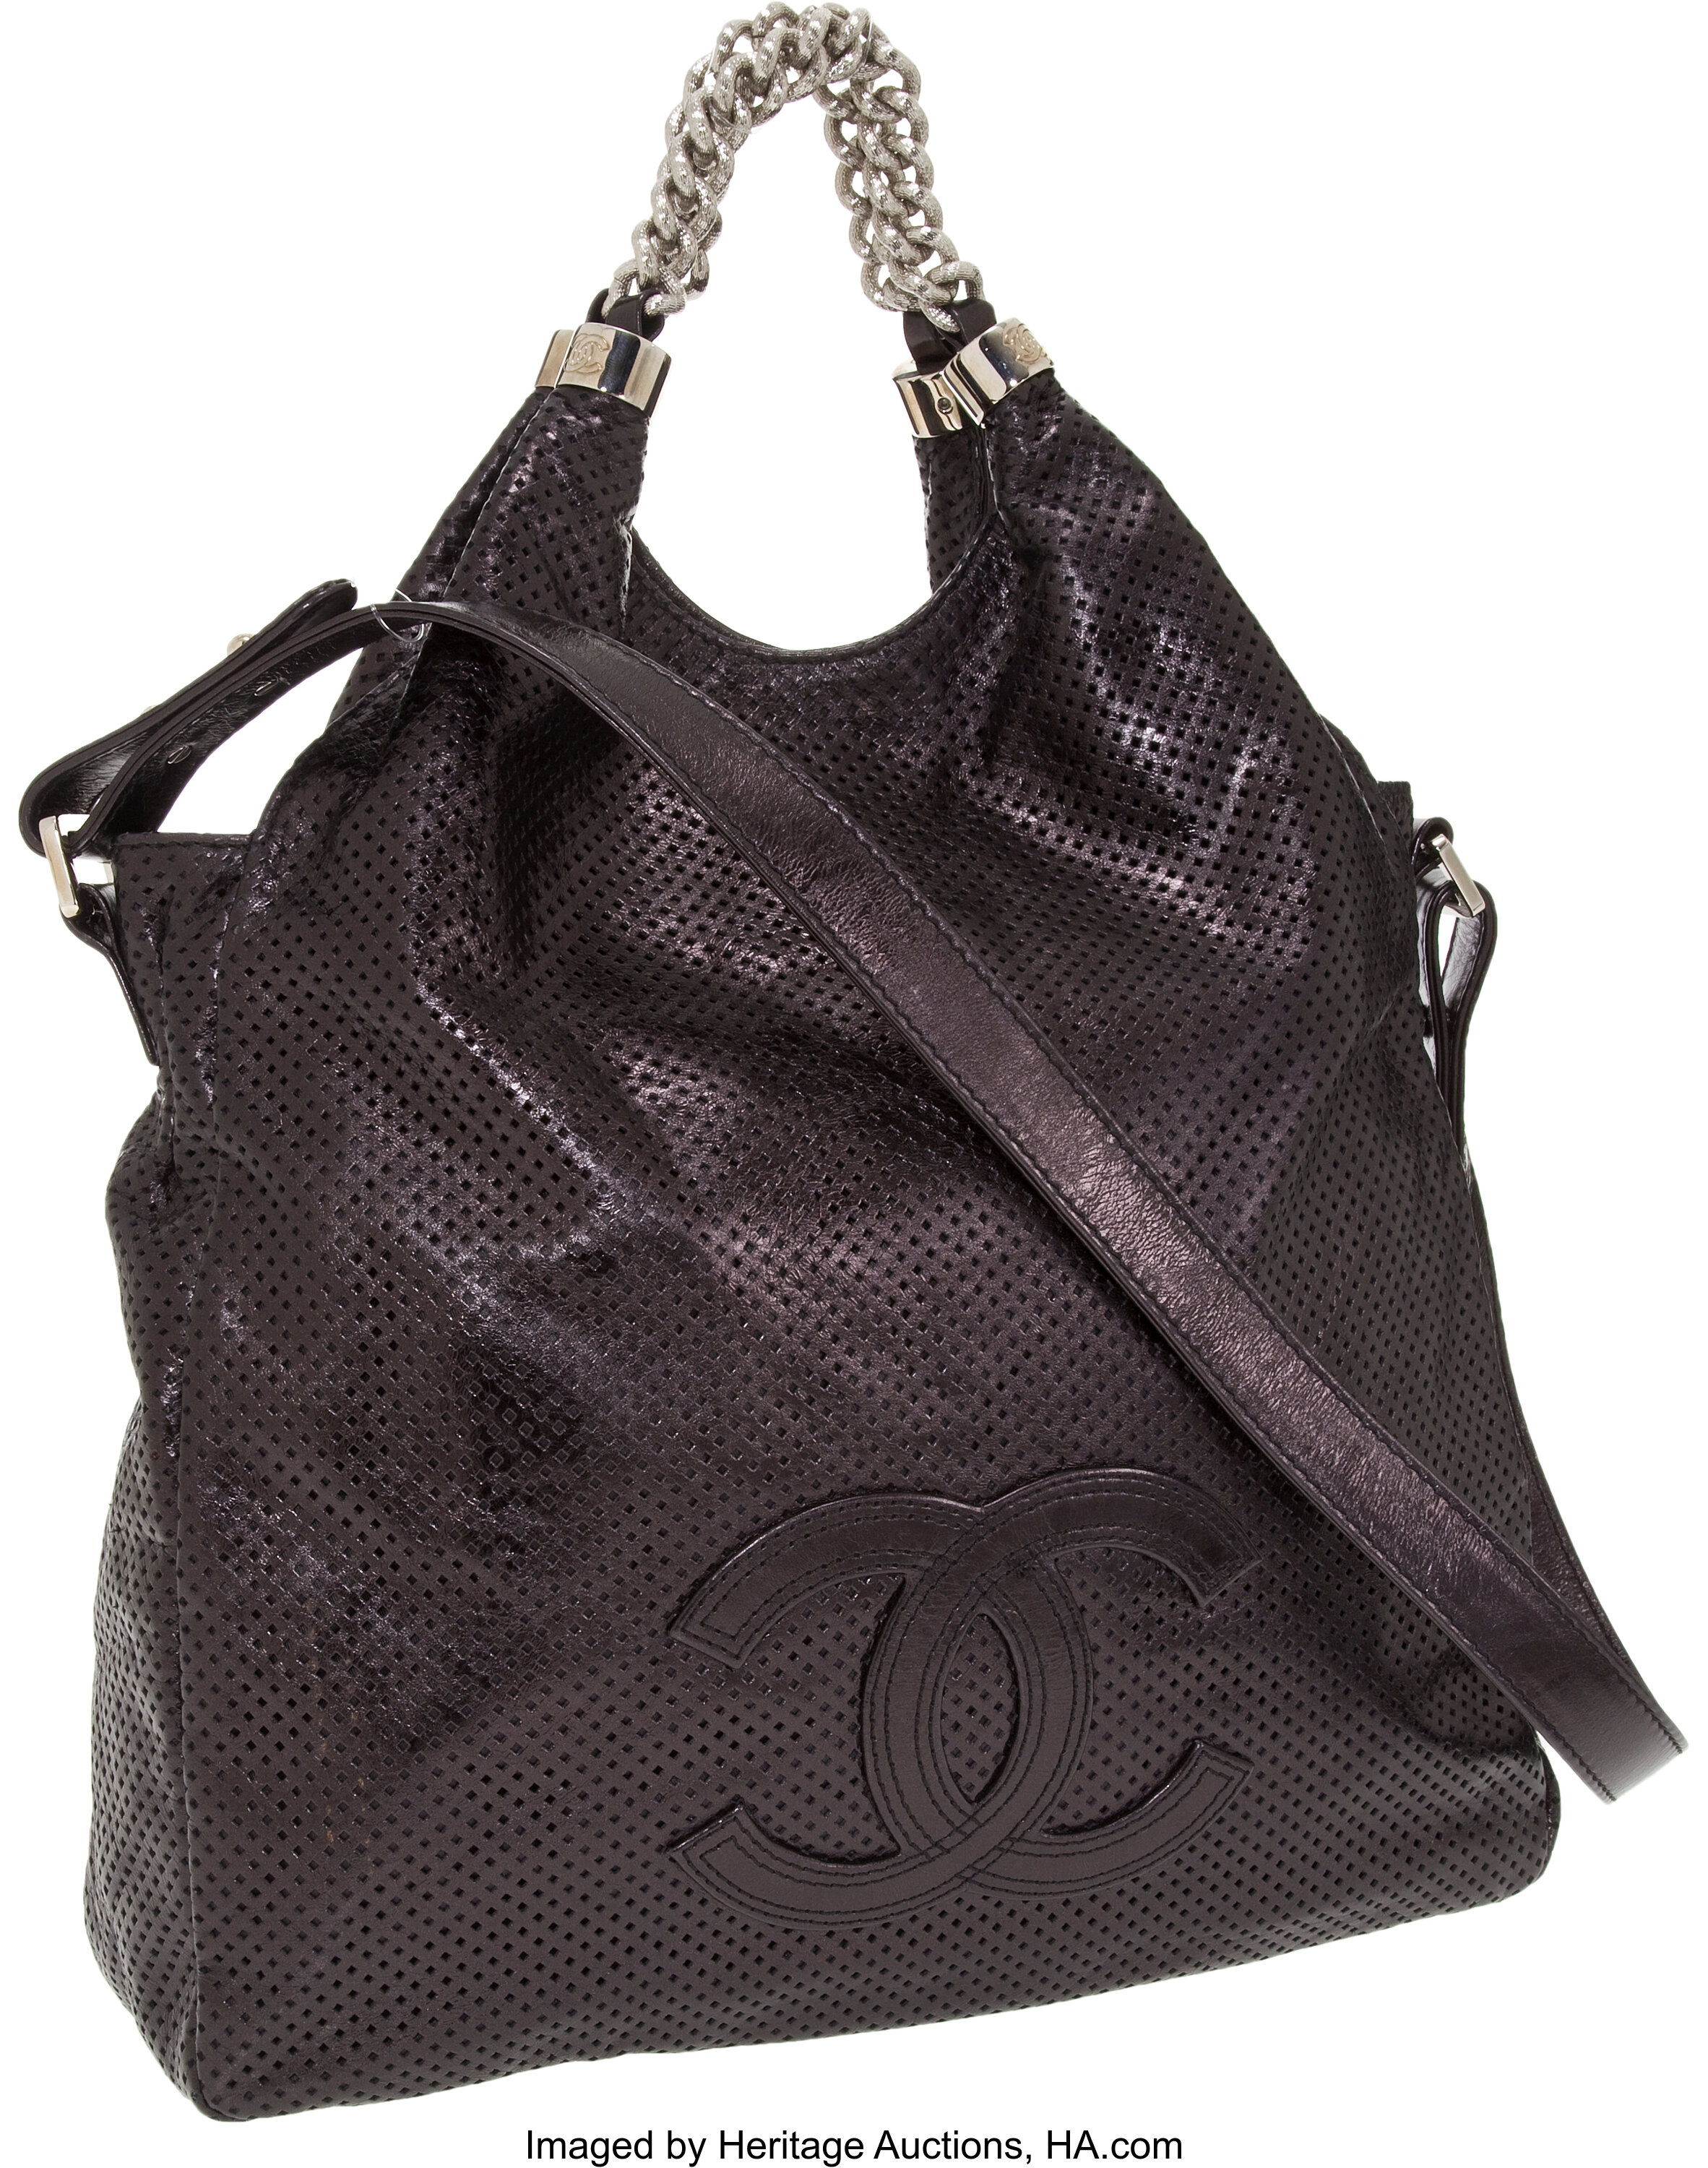 Chanel // Black Leather Rodeo Drive Bag – VSP Consignment